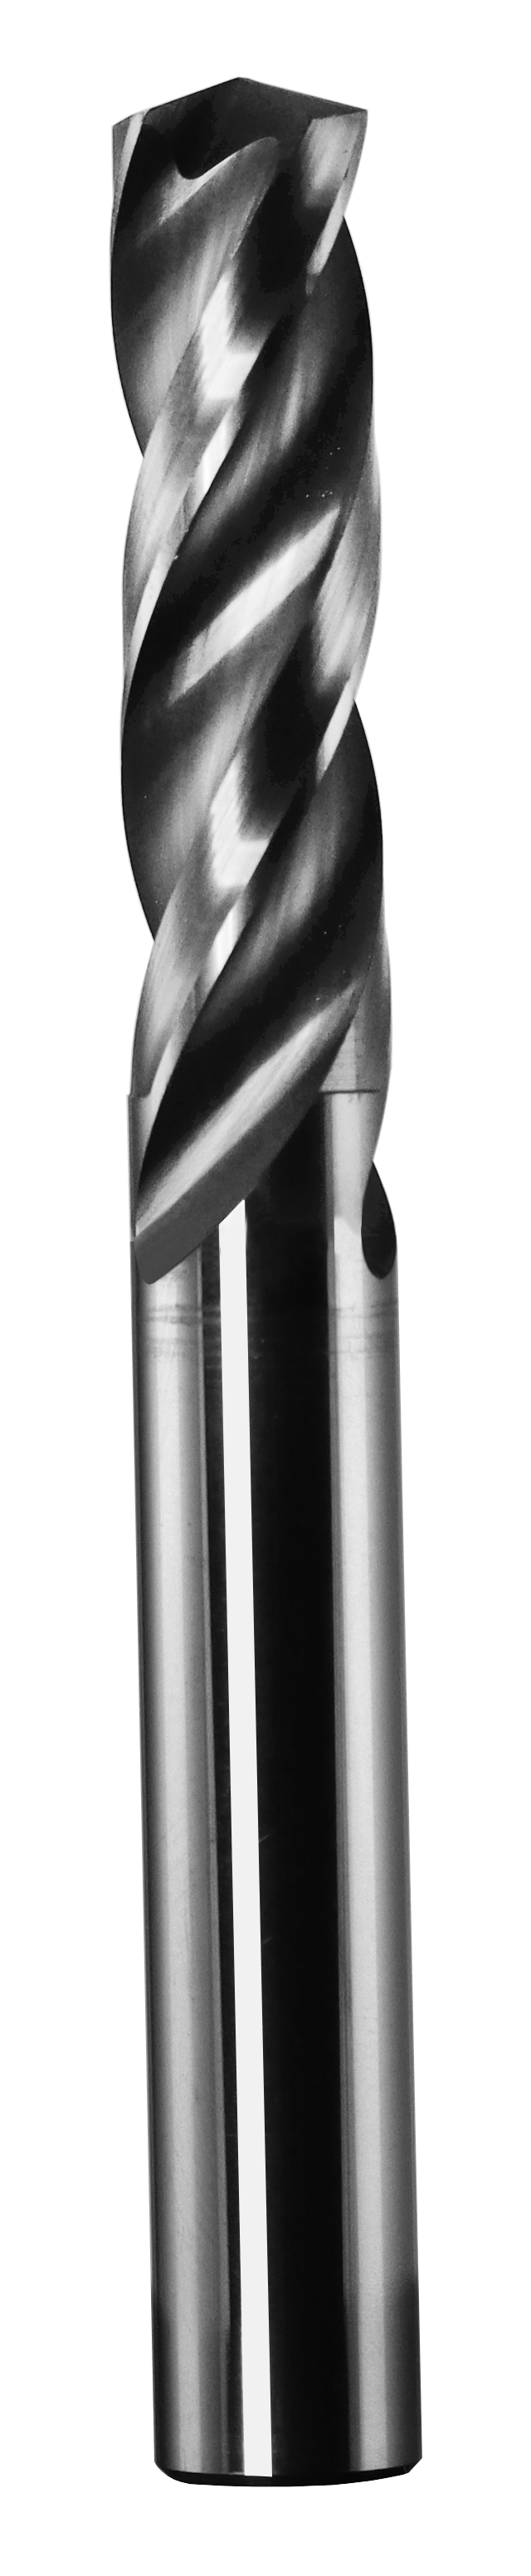 12.50mm Dia, 150 Degree Point, Solid Carbide Drill - 63035